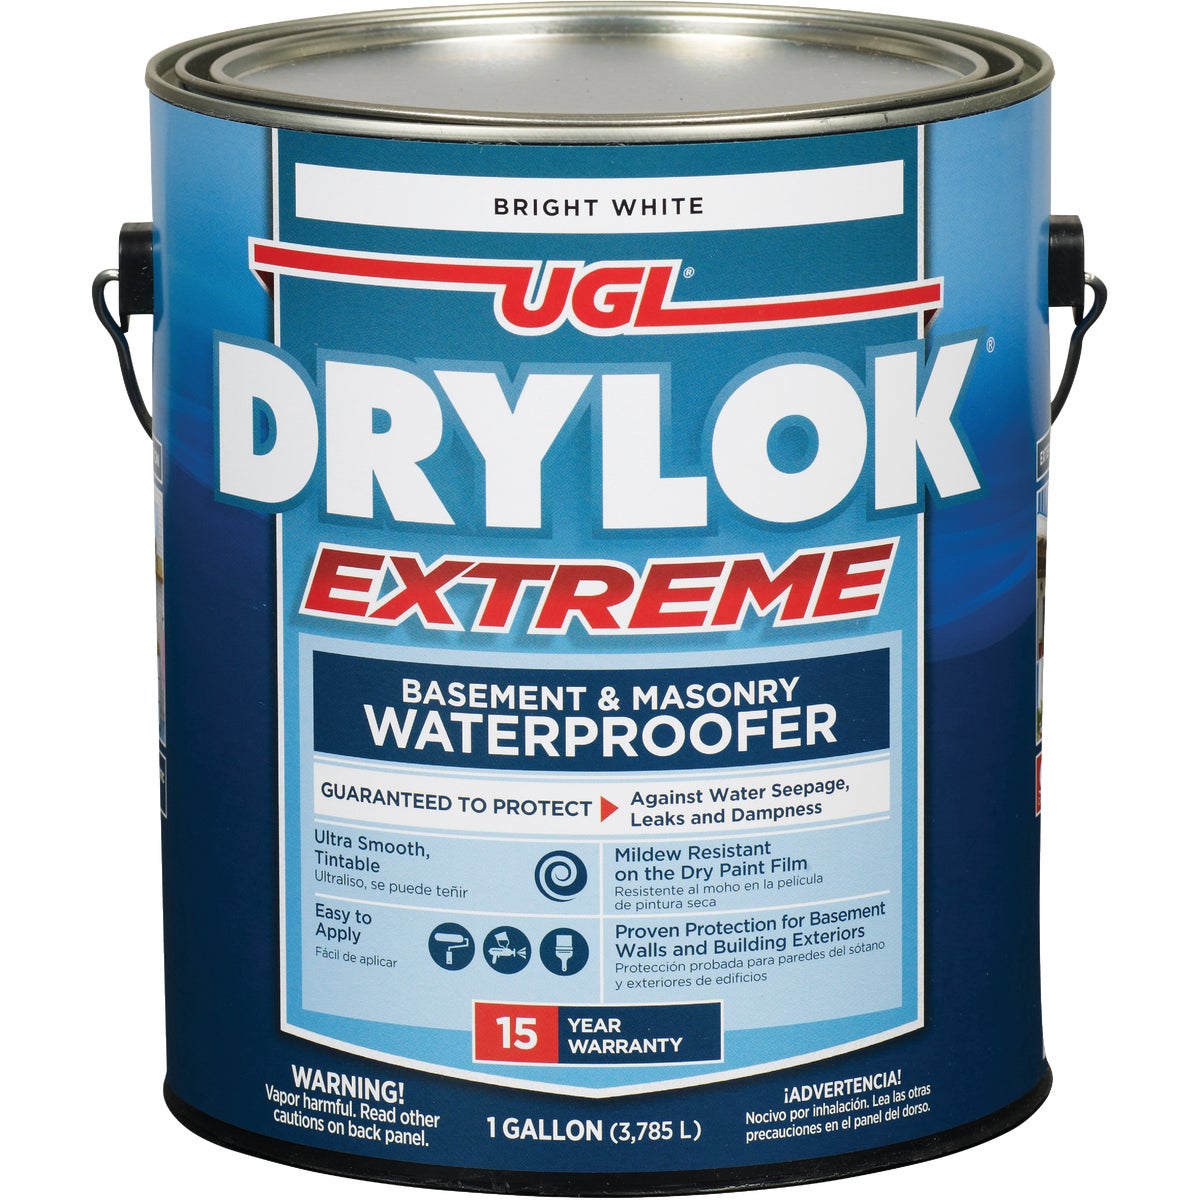 Item 784910, Smoother waterproof paint is perfect for the most demanding conditions.